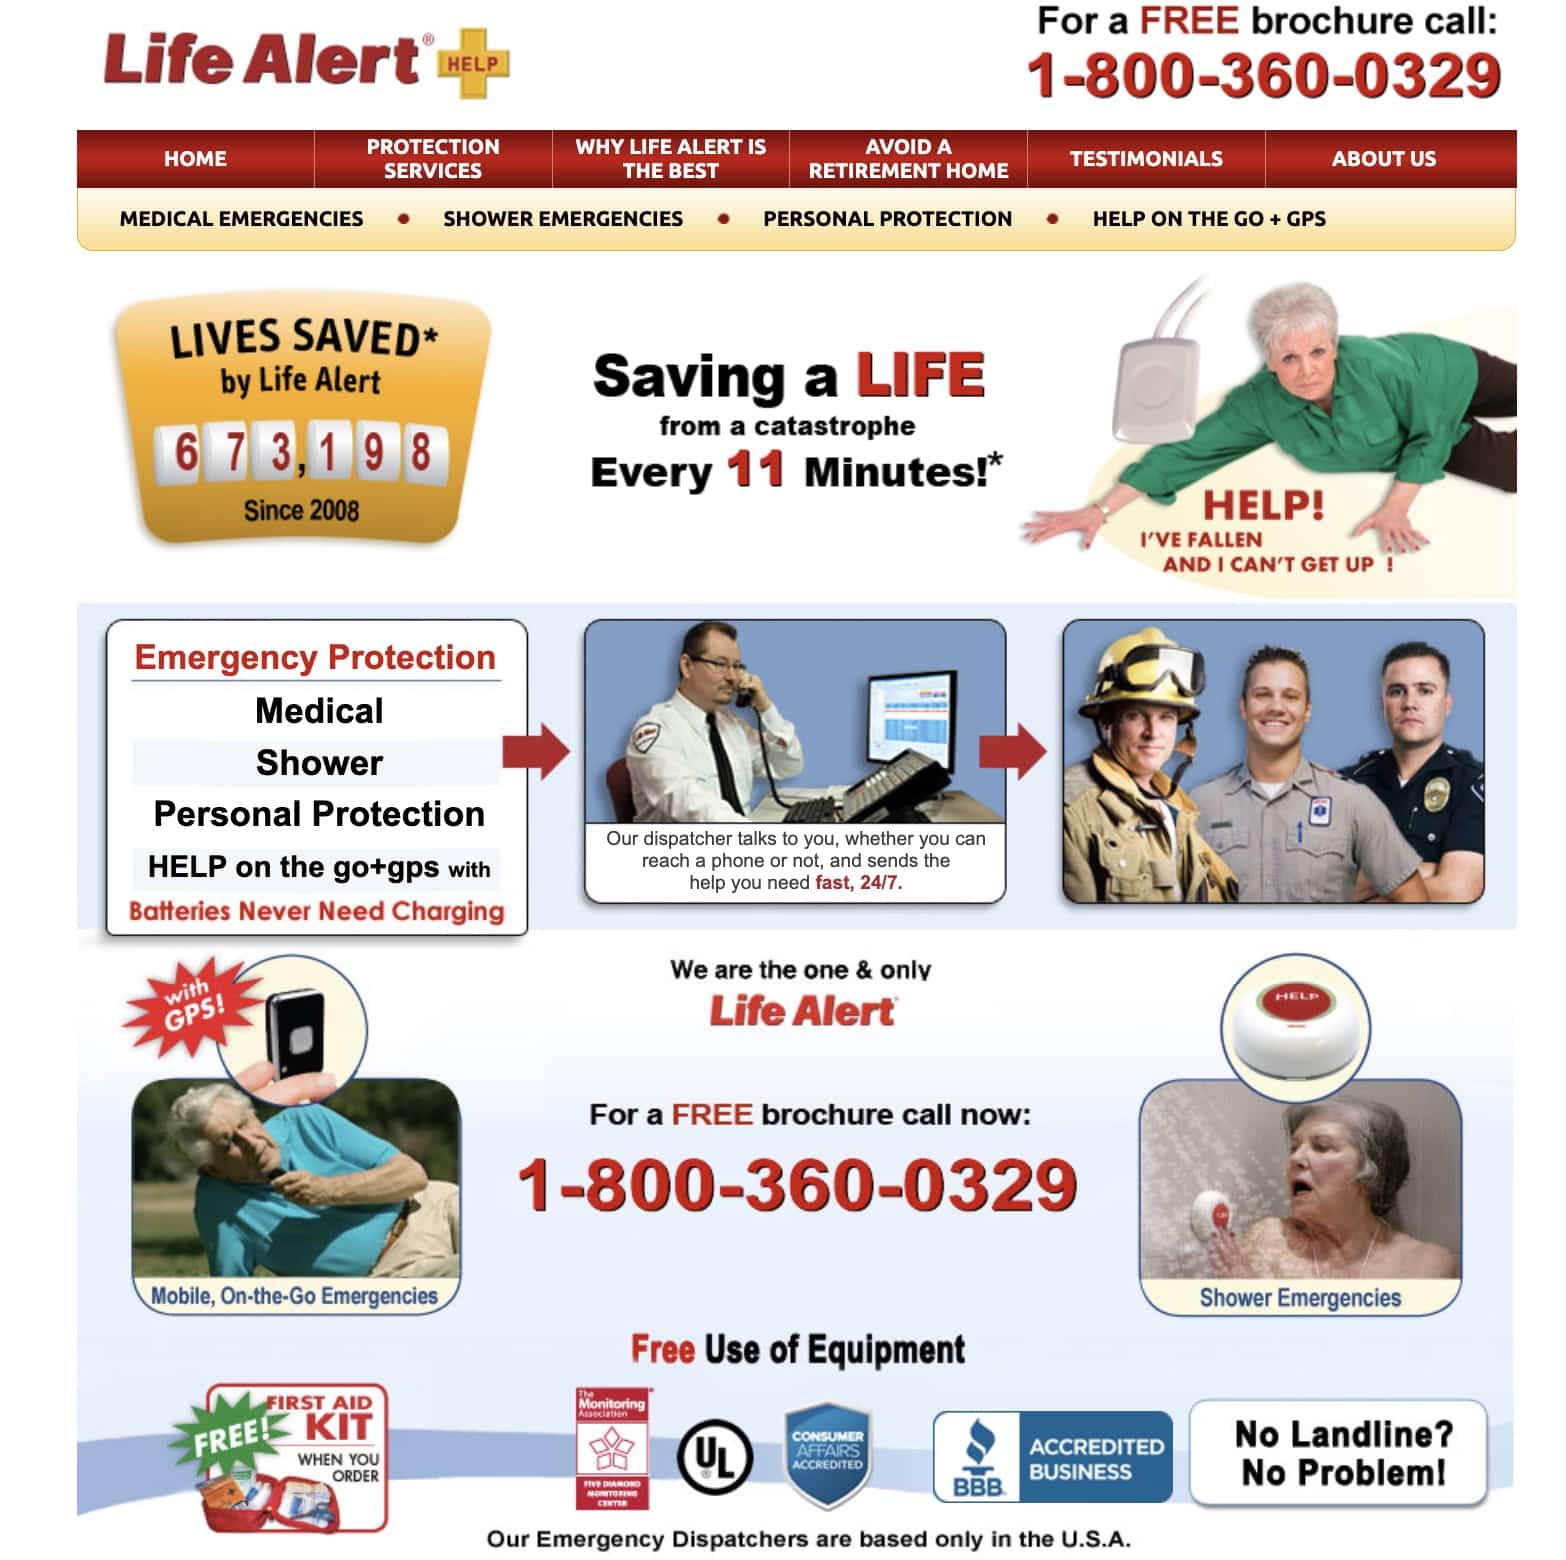 Life Alert homepage with the claim “Saving a life from a catastrophe every 11 minutes” surrounded by images of emergency responders and older adults using Life Alert systems.